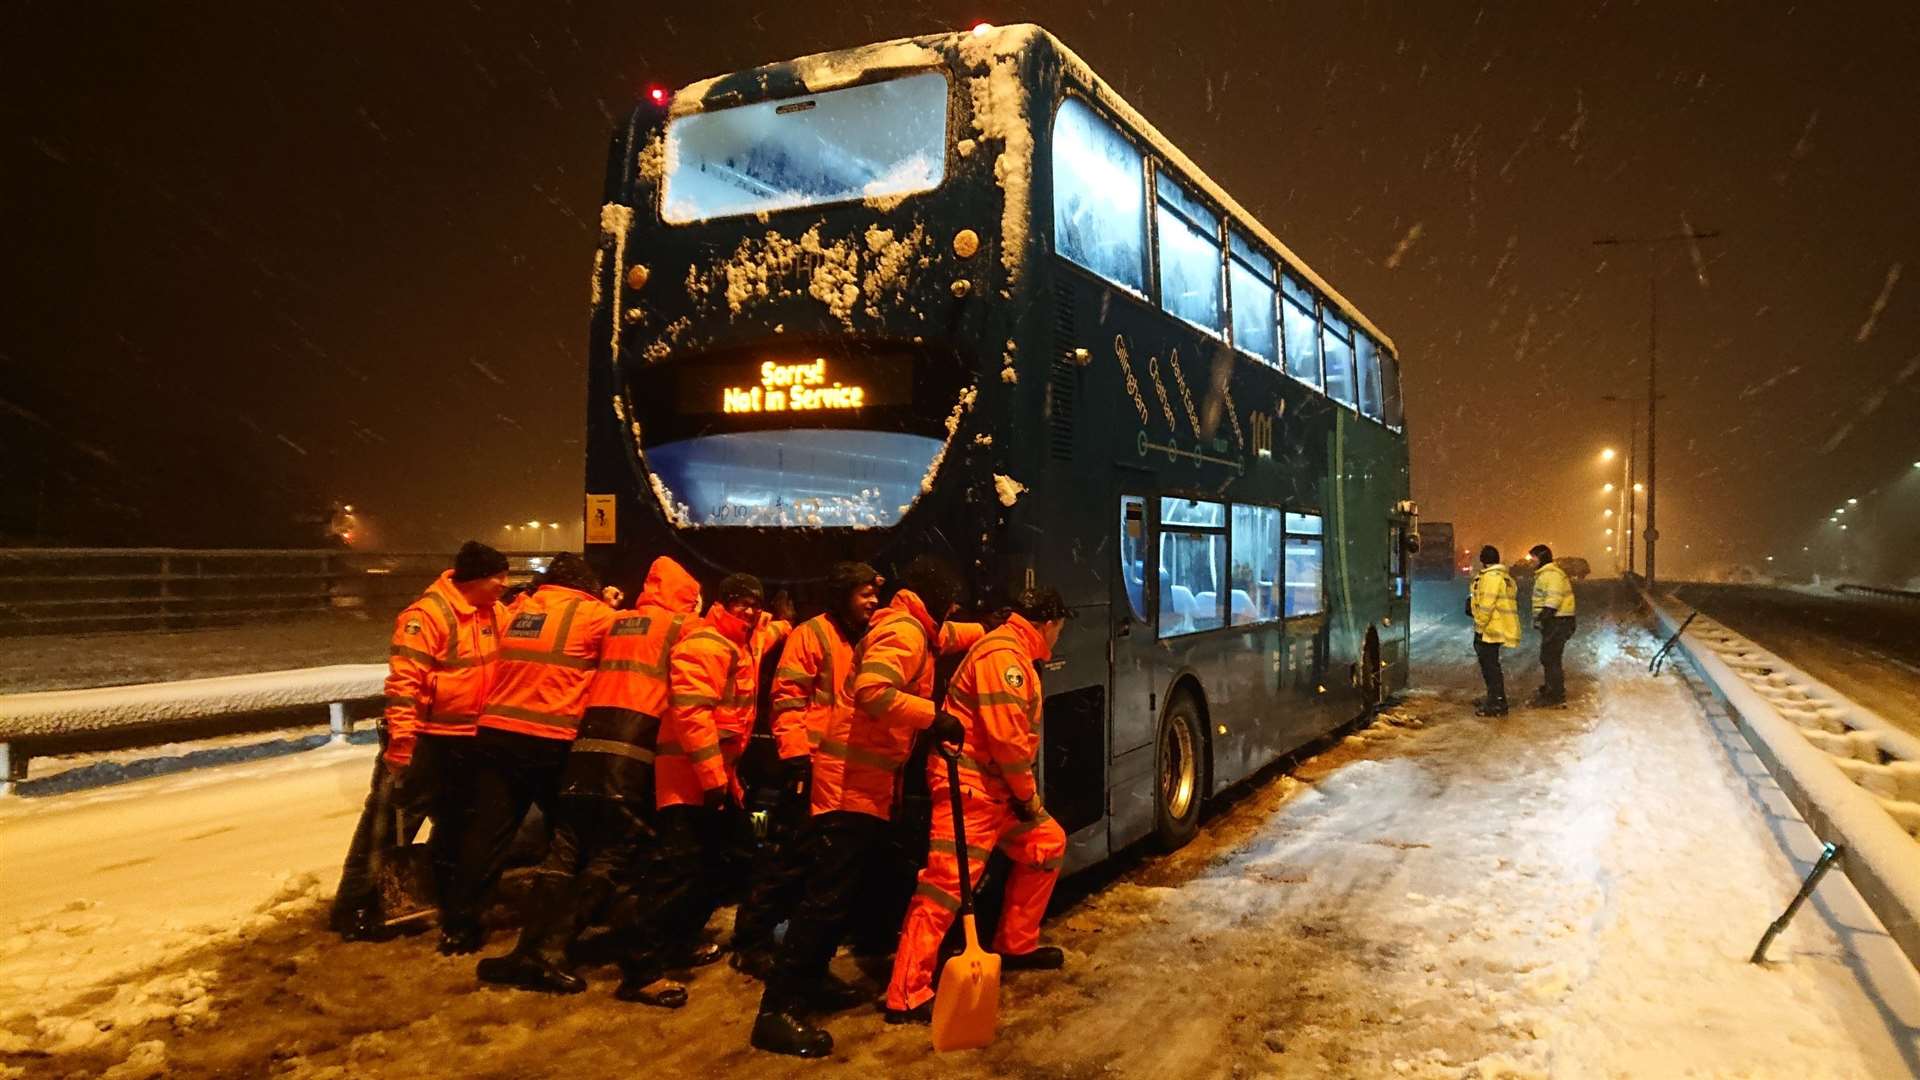 The team came together to shove a double decker bus out of the snow. Pic by Alan Moles